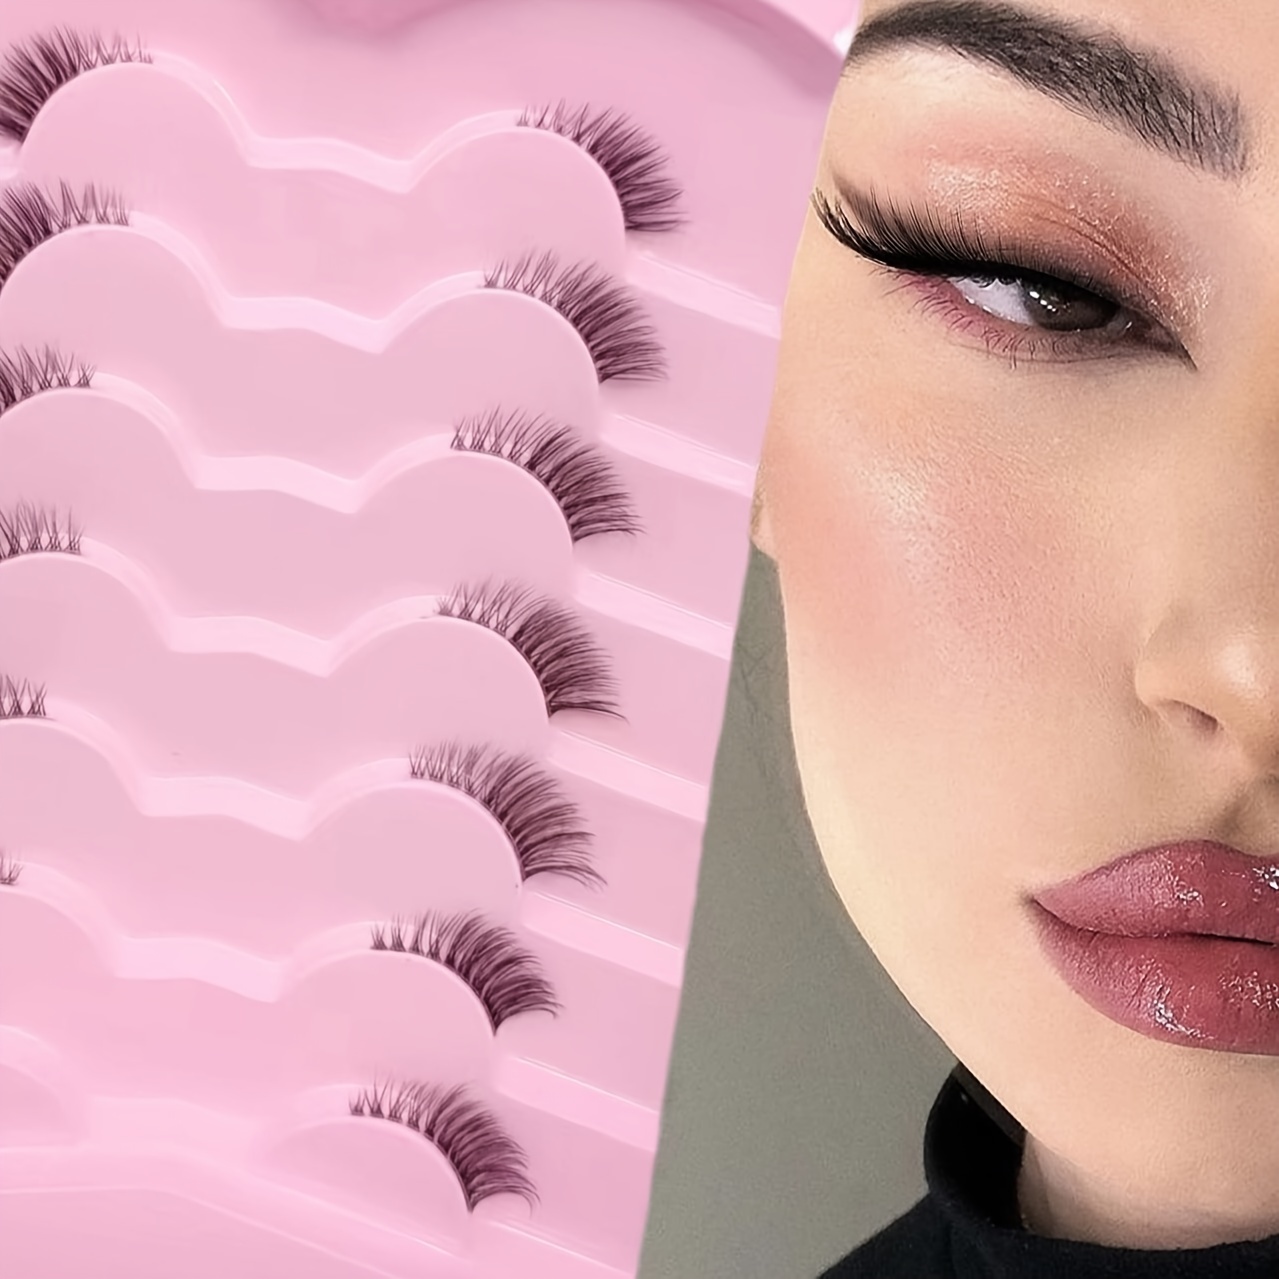 

7 Pairs False Eyelashes, Mixed Length Fox Eye Lashes, 3-5-9mm, D Curling Slender And Fluffy, Natural Looking, Synthetic Mink Fairy Like Cat Eye Look Lashes Makeup